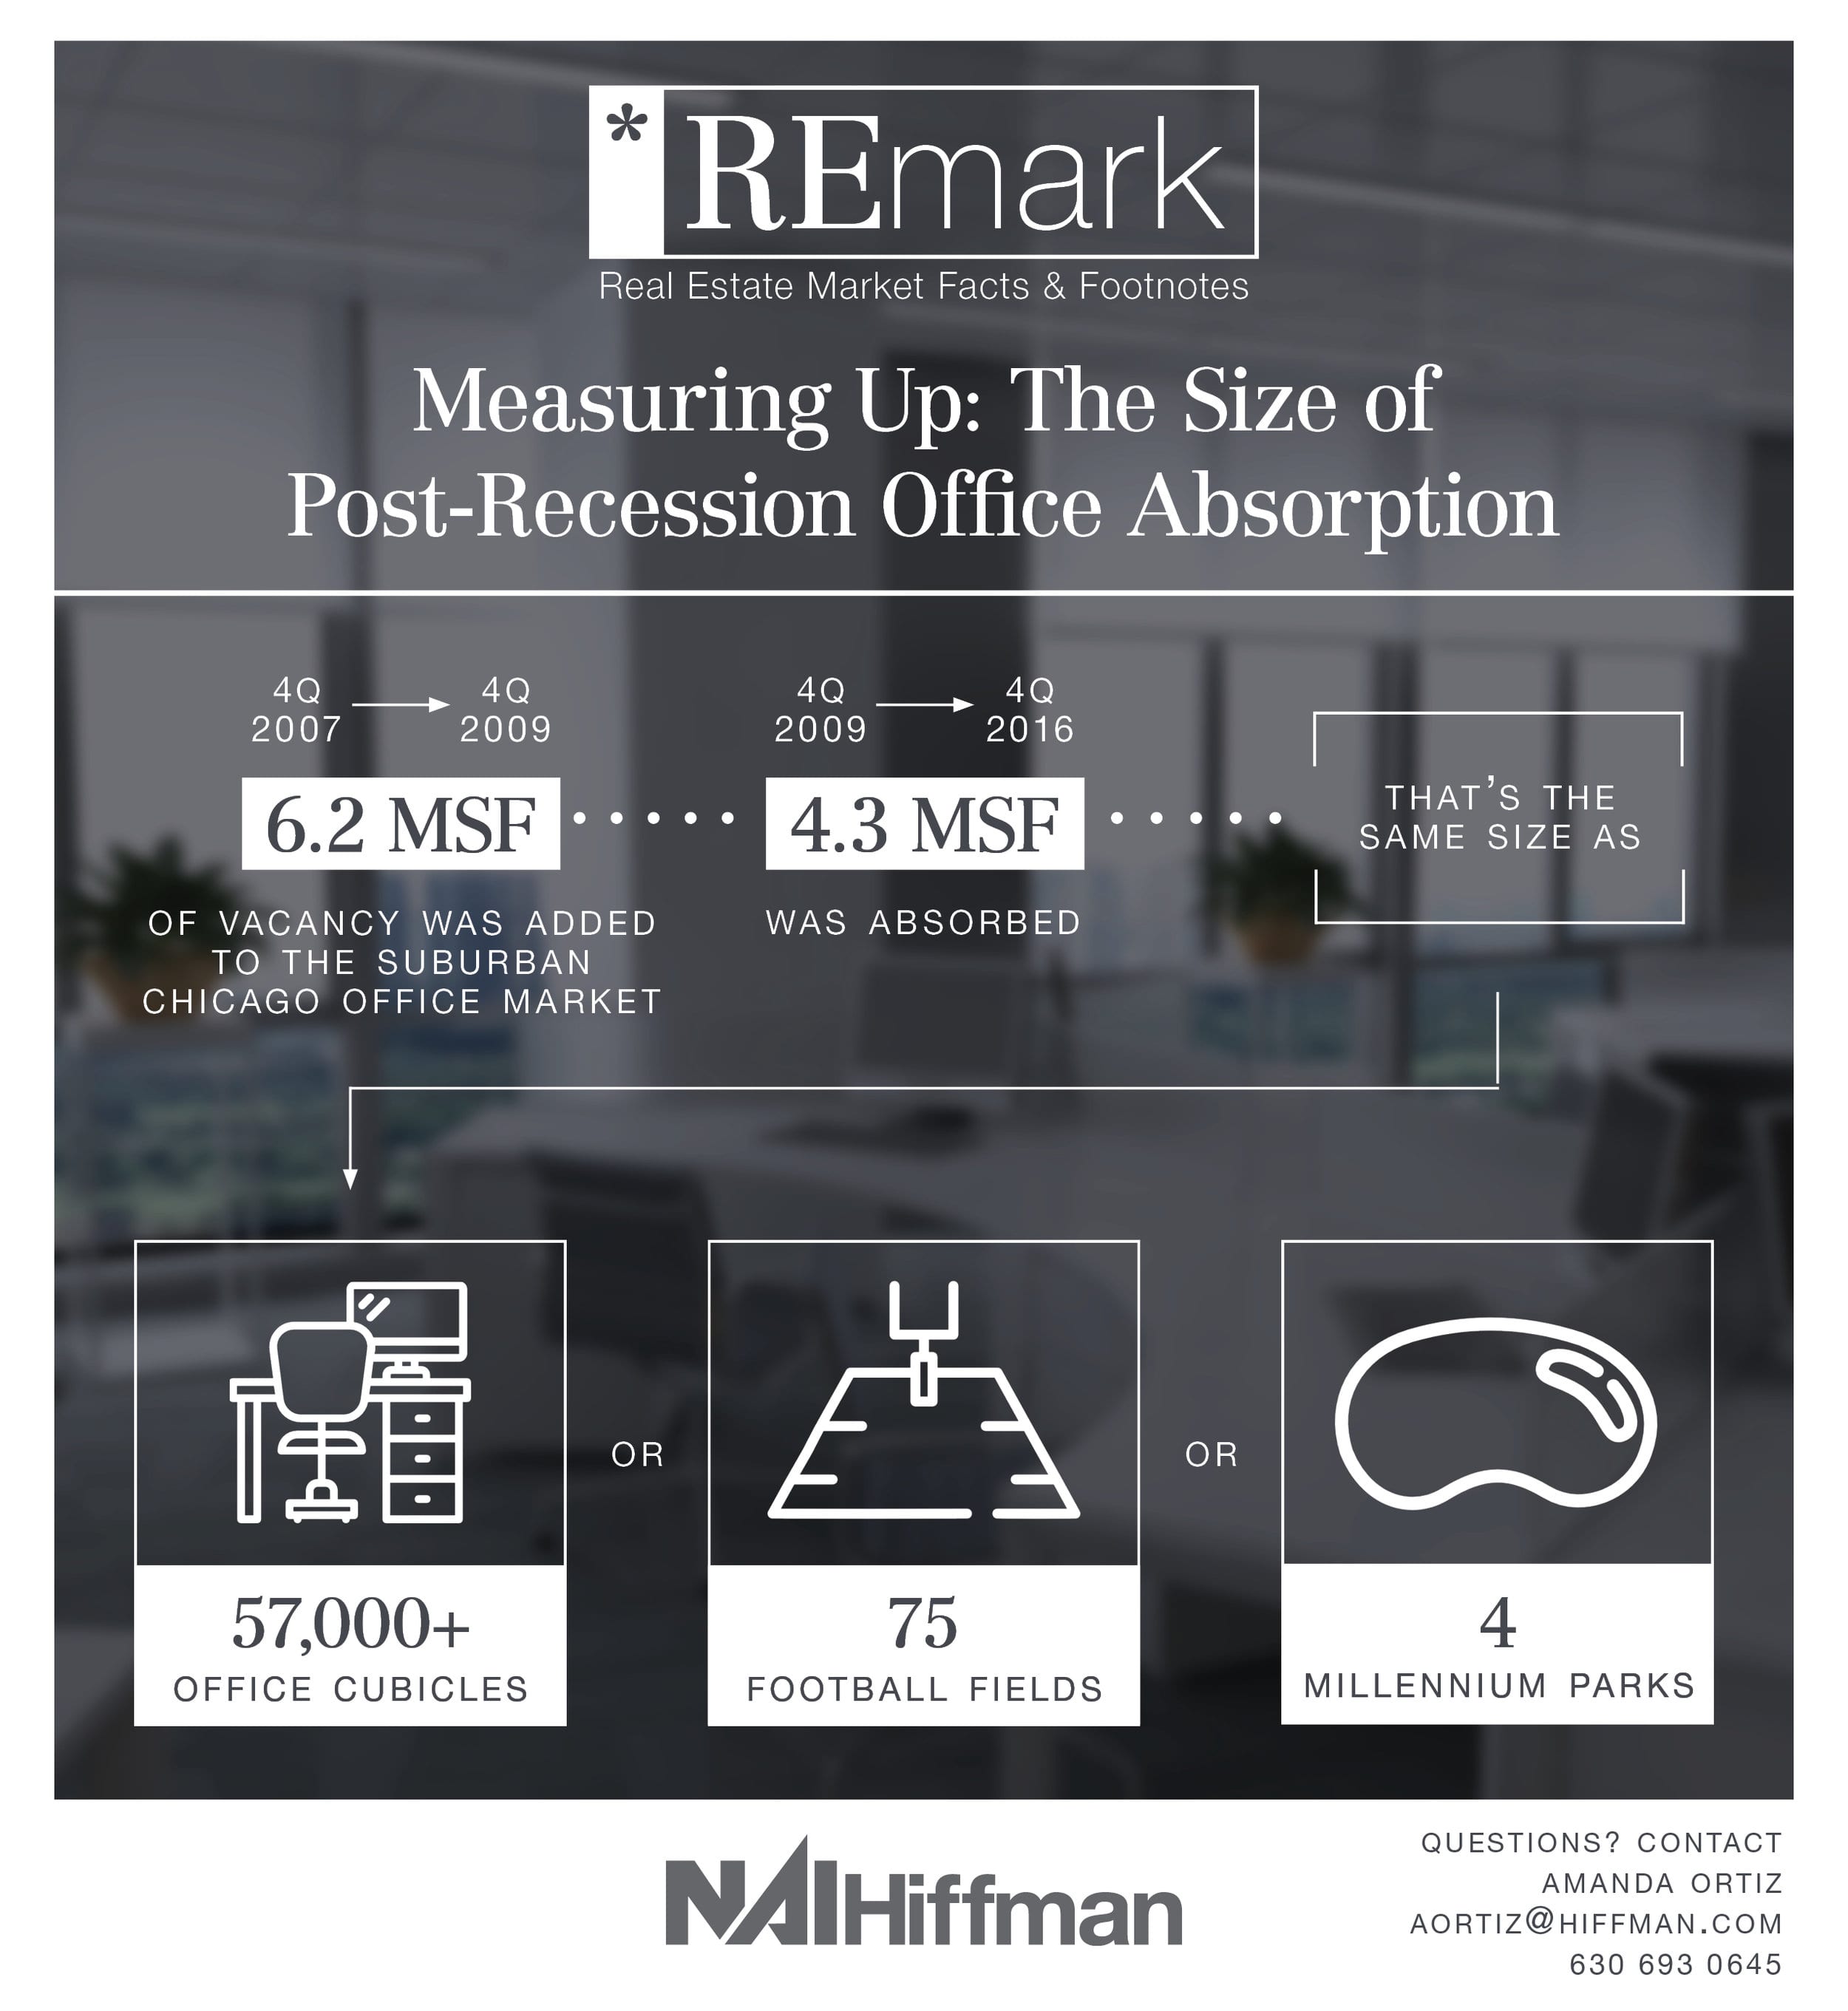 REmark: Measuring Up: The Size of Post-Recession Office Absorption